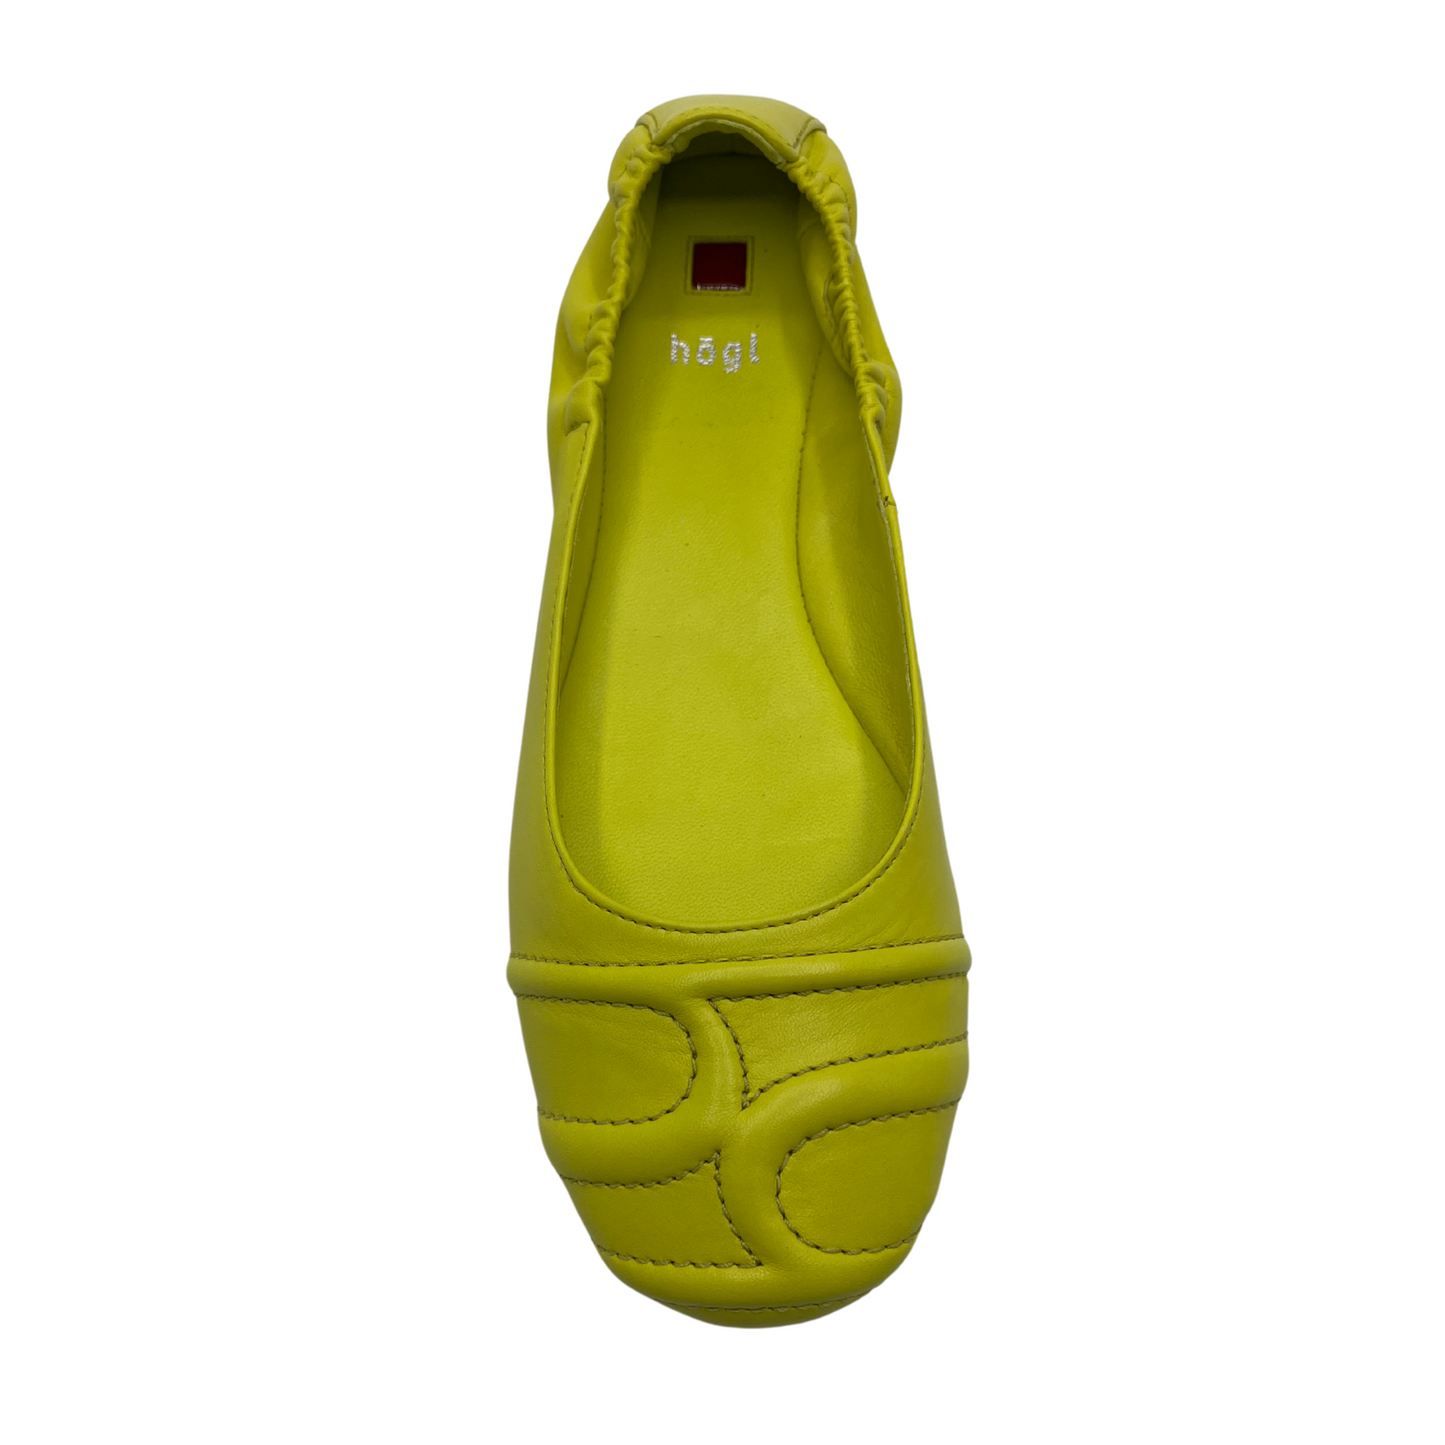 Top view of lime leather ballet flats with a rounded toe and elasticated back